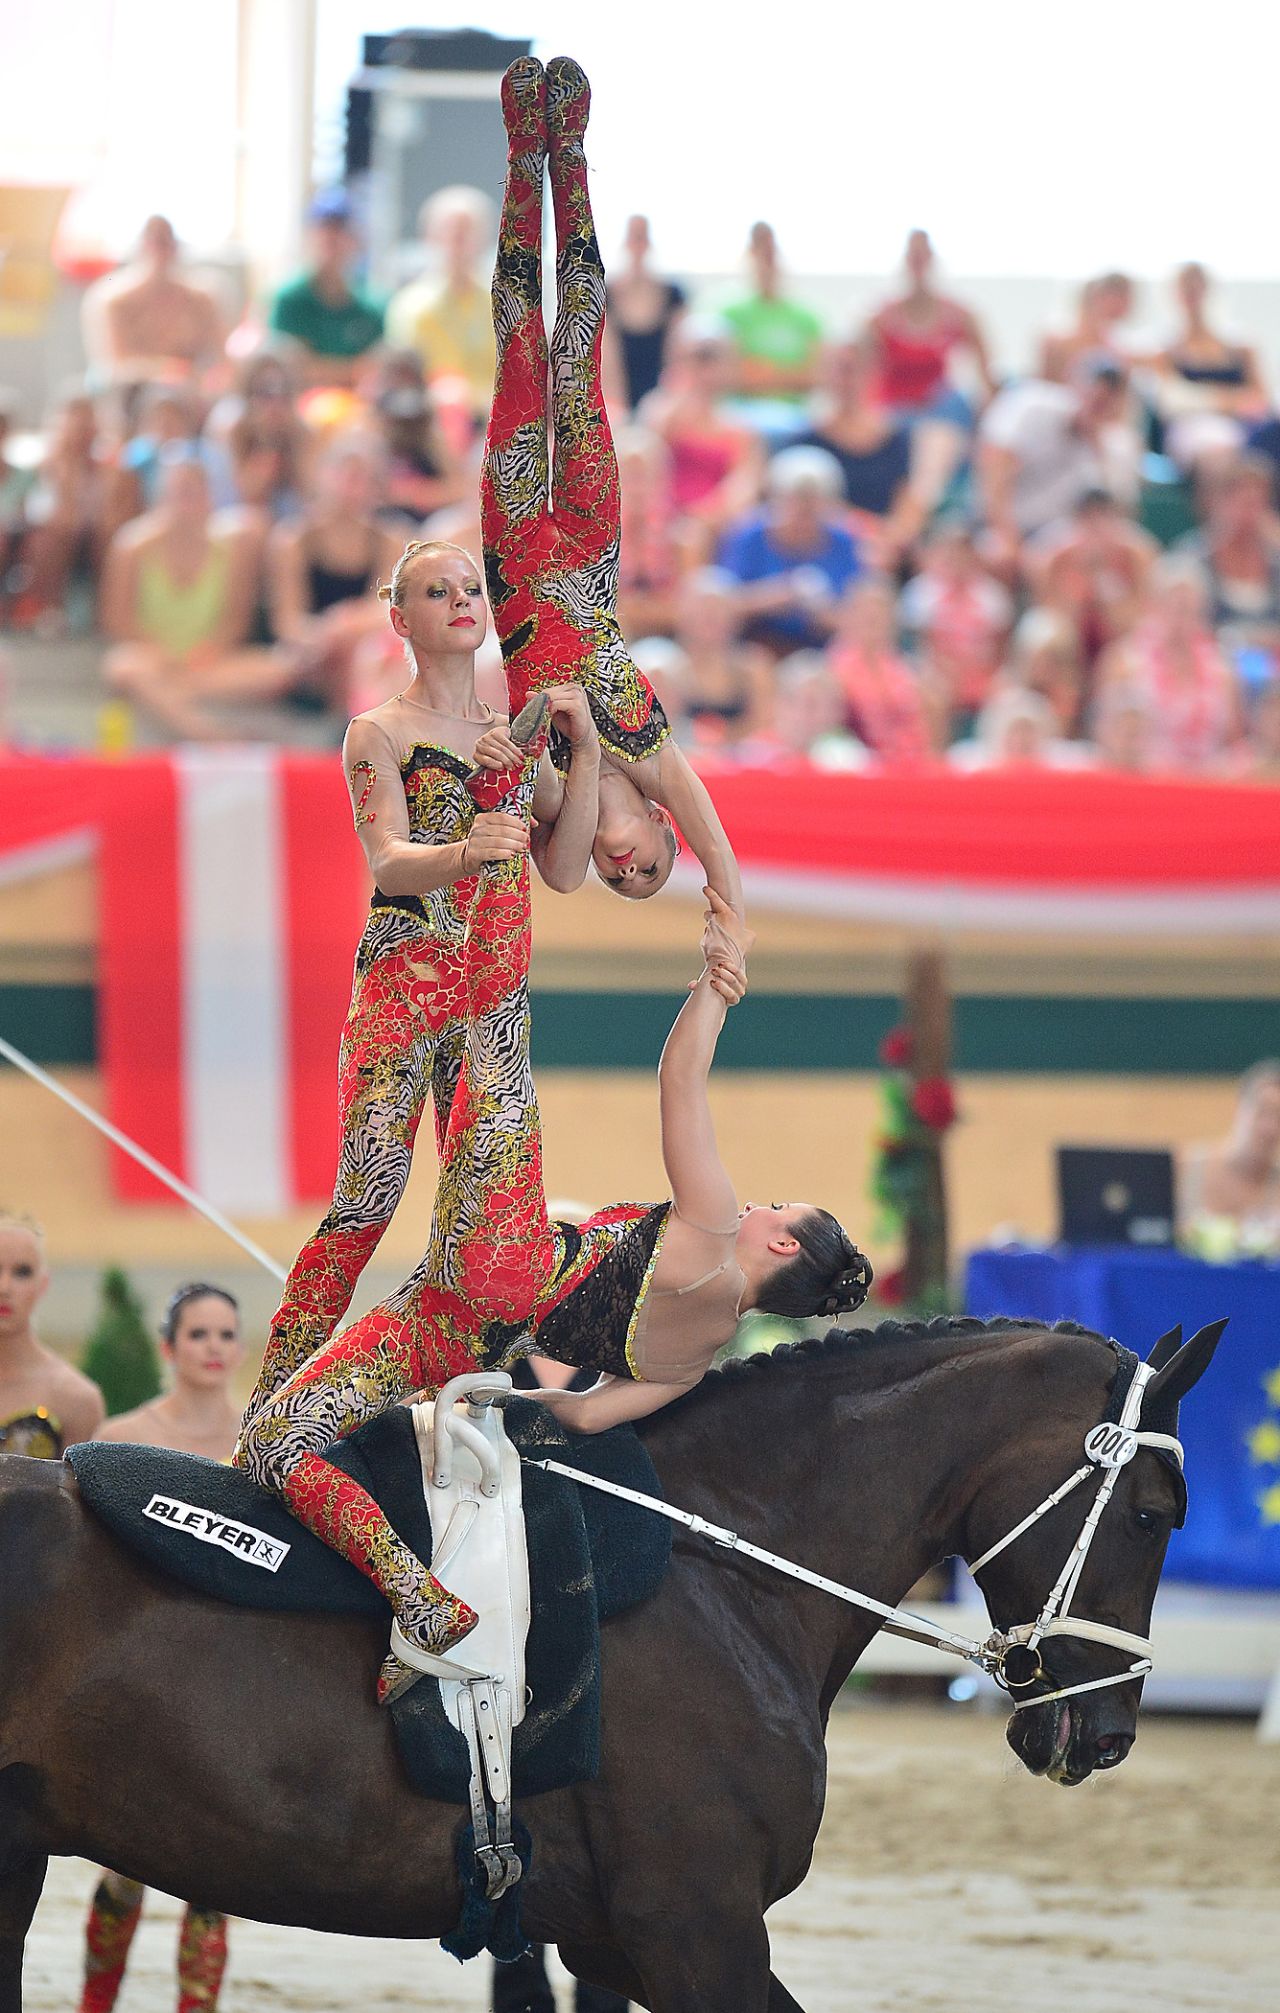 Germany has long been the world's leading vaulting nation. In 2013 the Germans won the European team event, which involves six vaulters, up to three of whom may touch the horse at any moment.